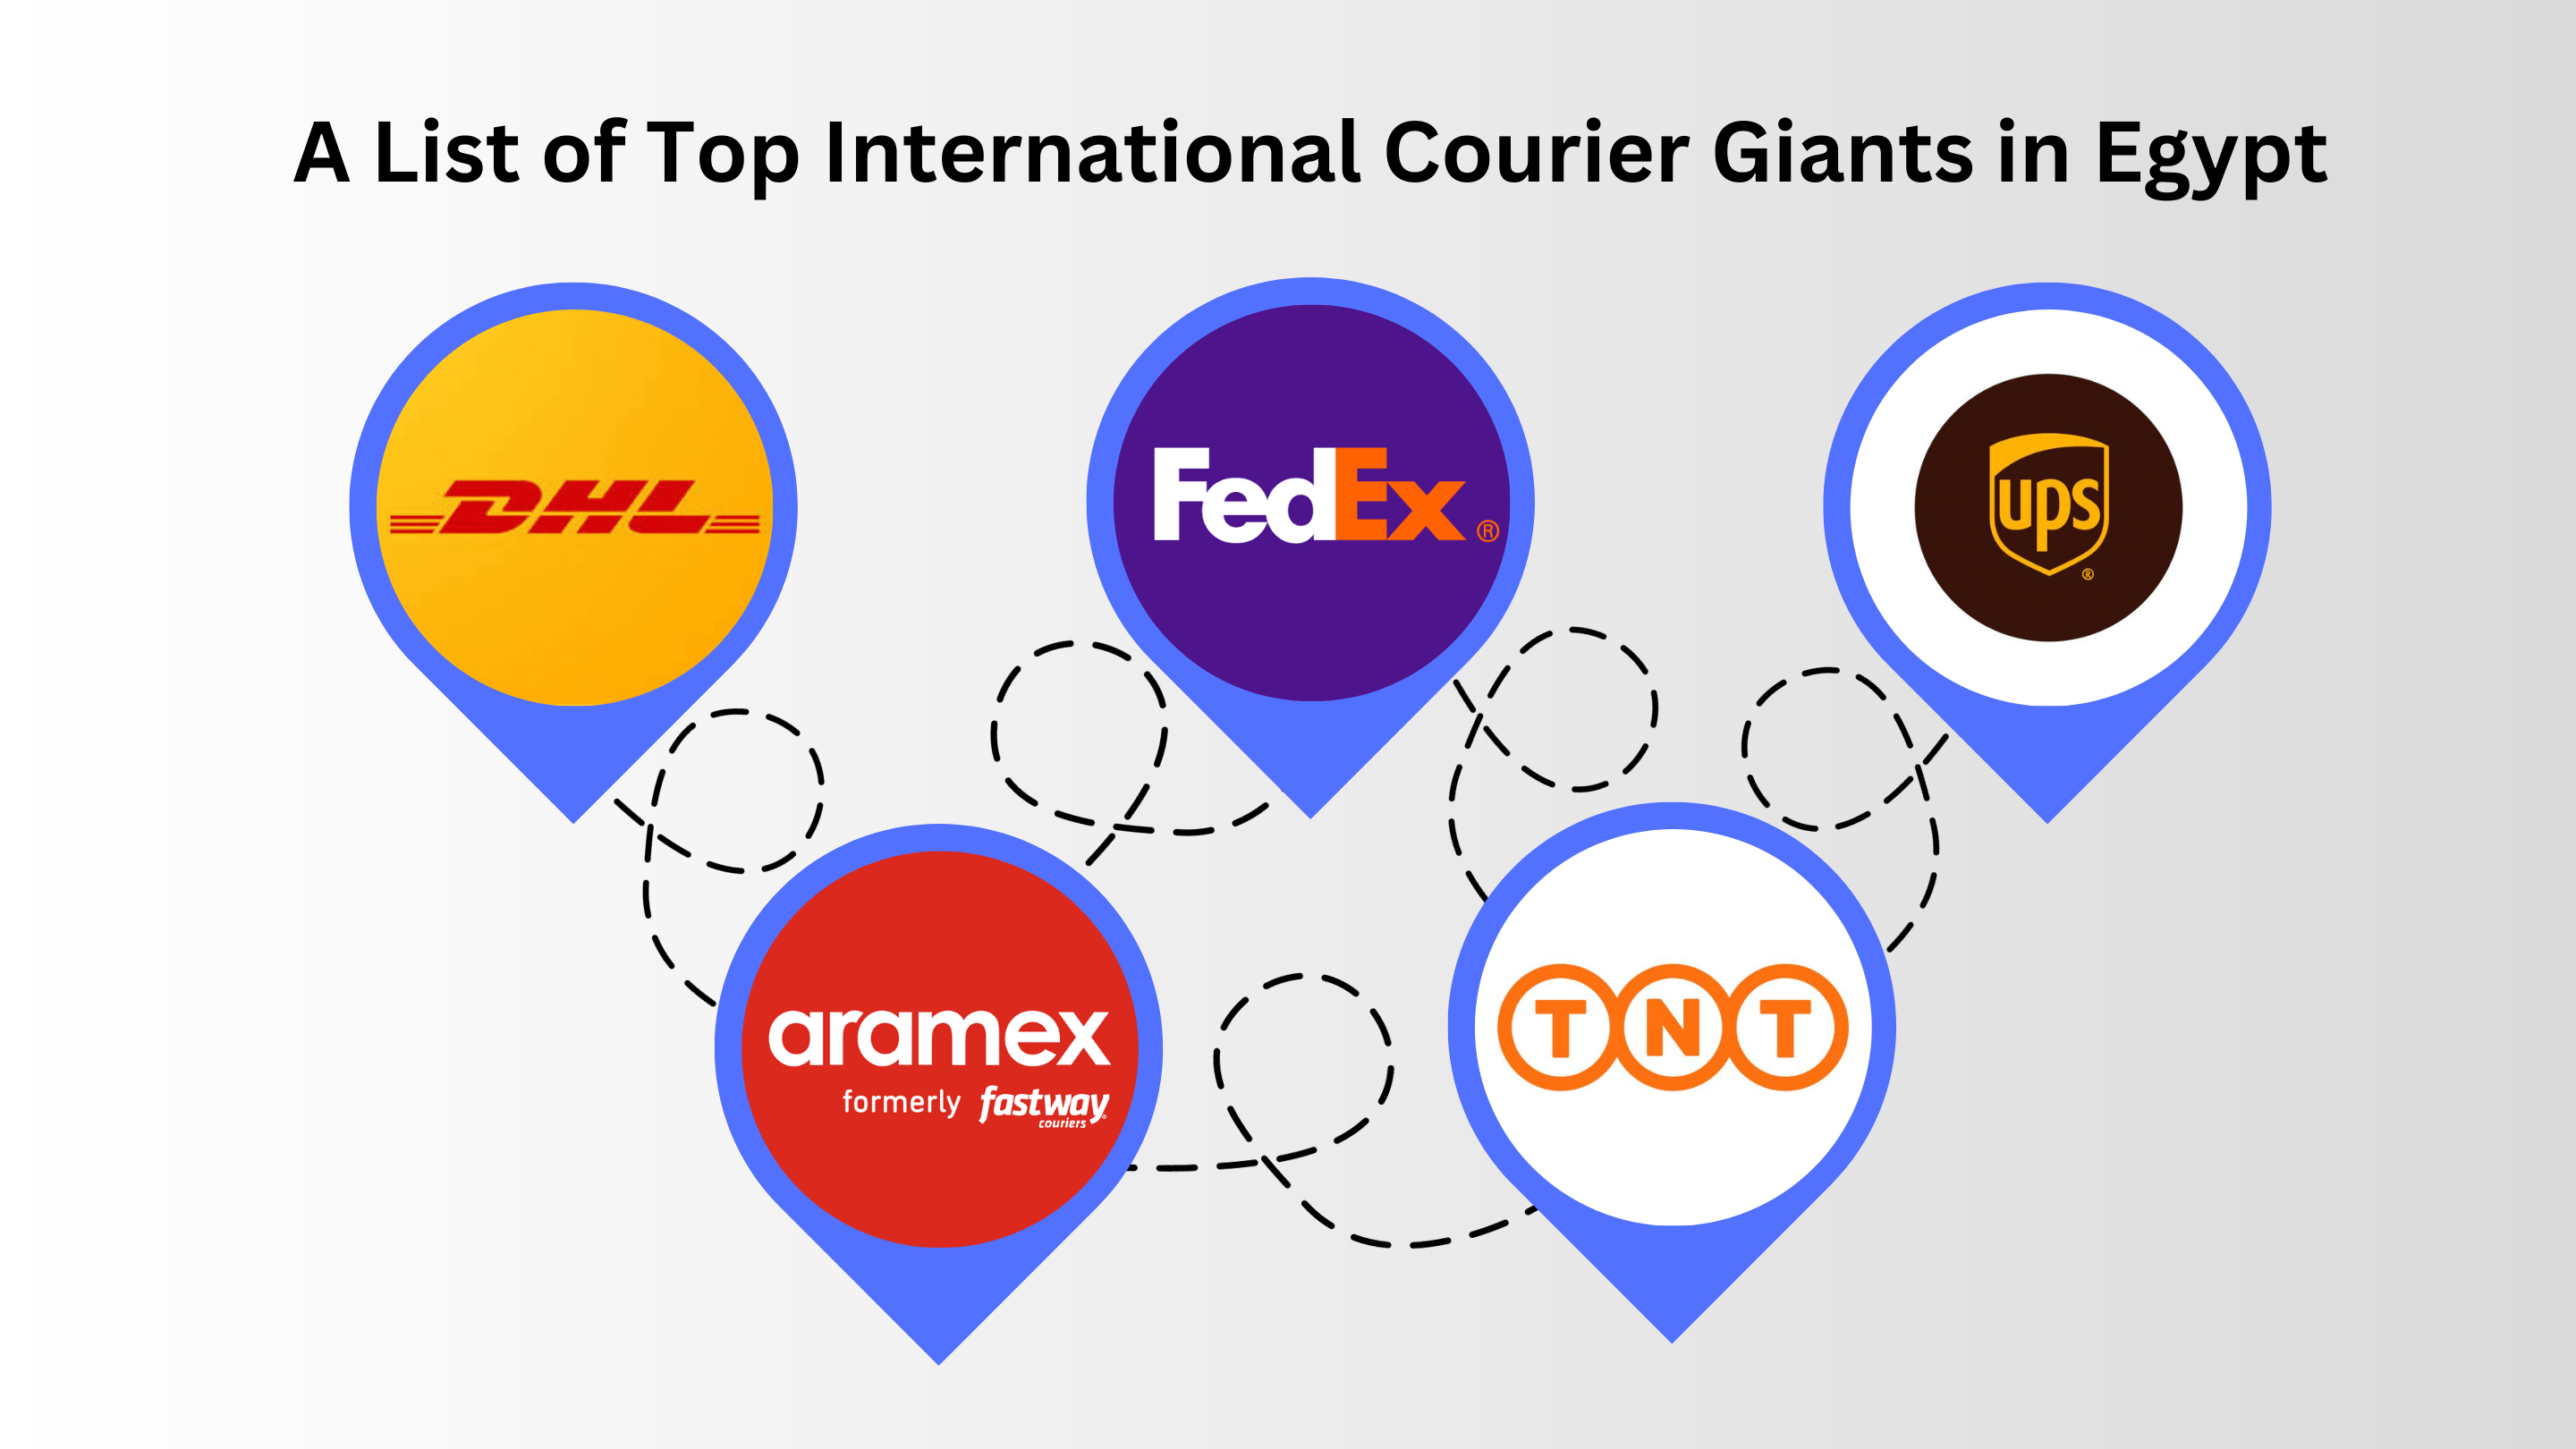 A List of Top International Courier Giants in Egypt